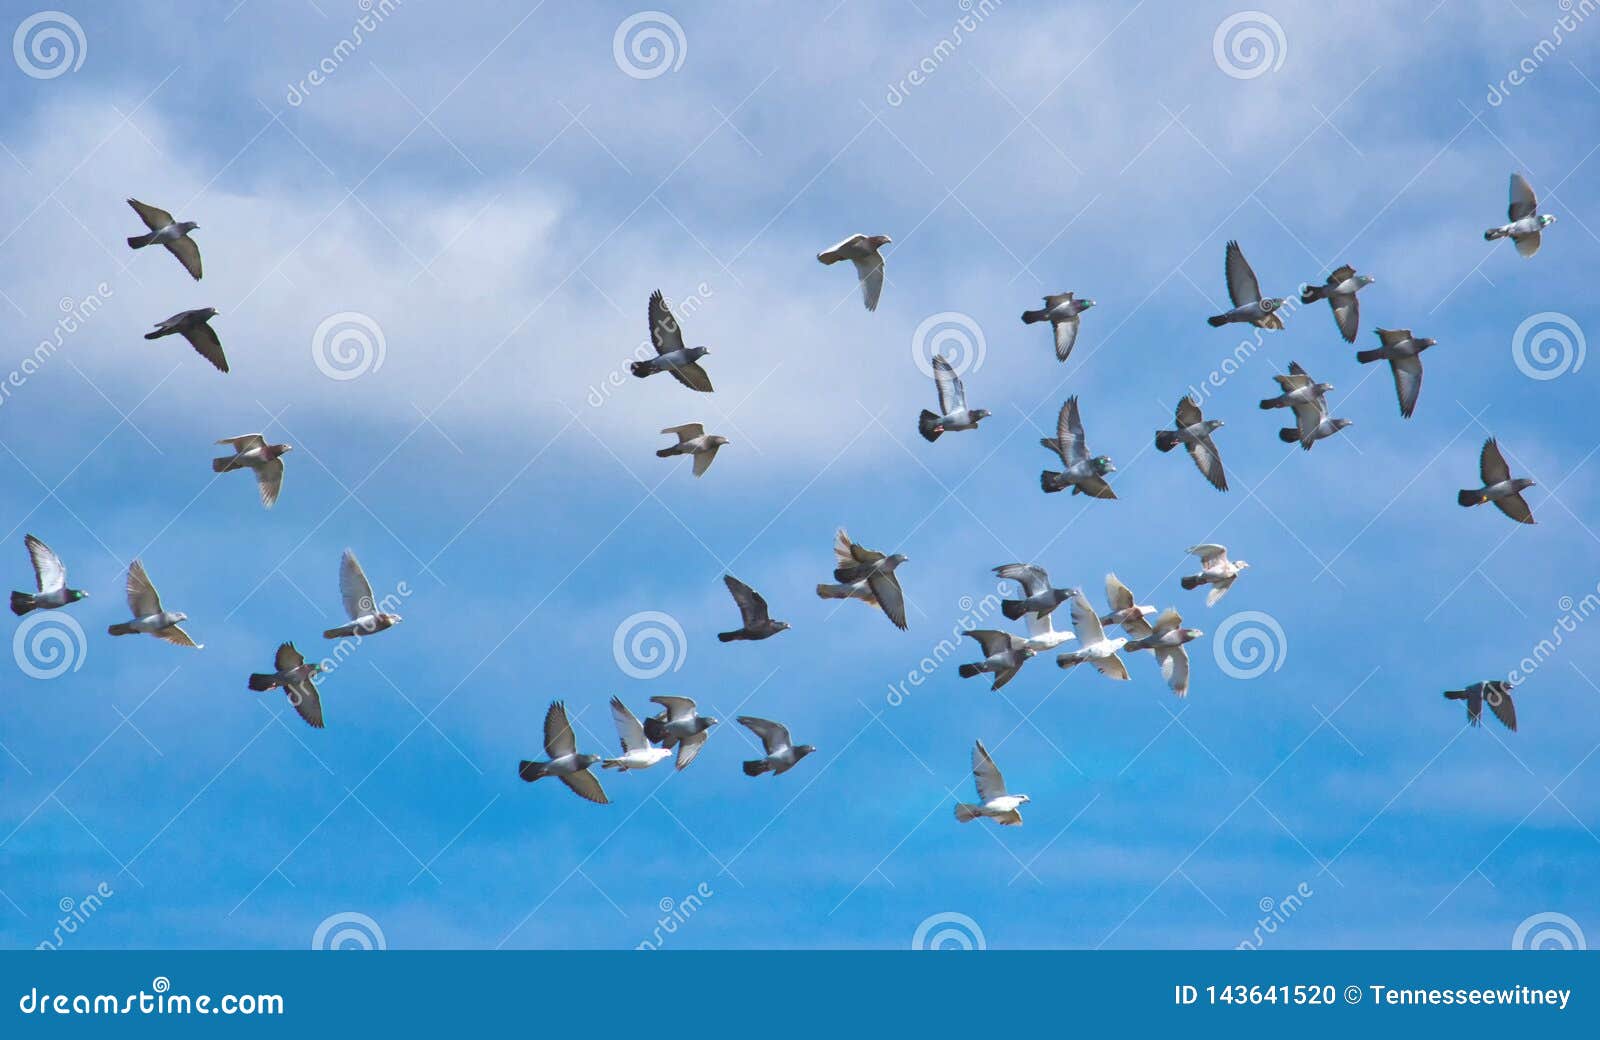 a flock of pigeons in flight against a blue sky